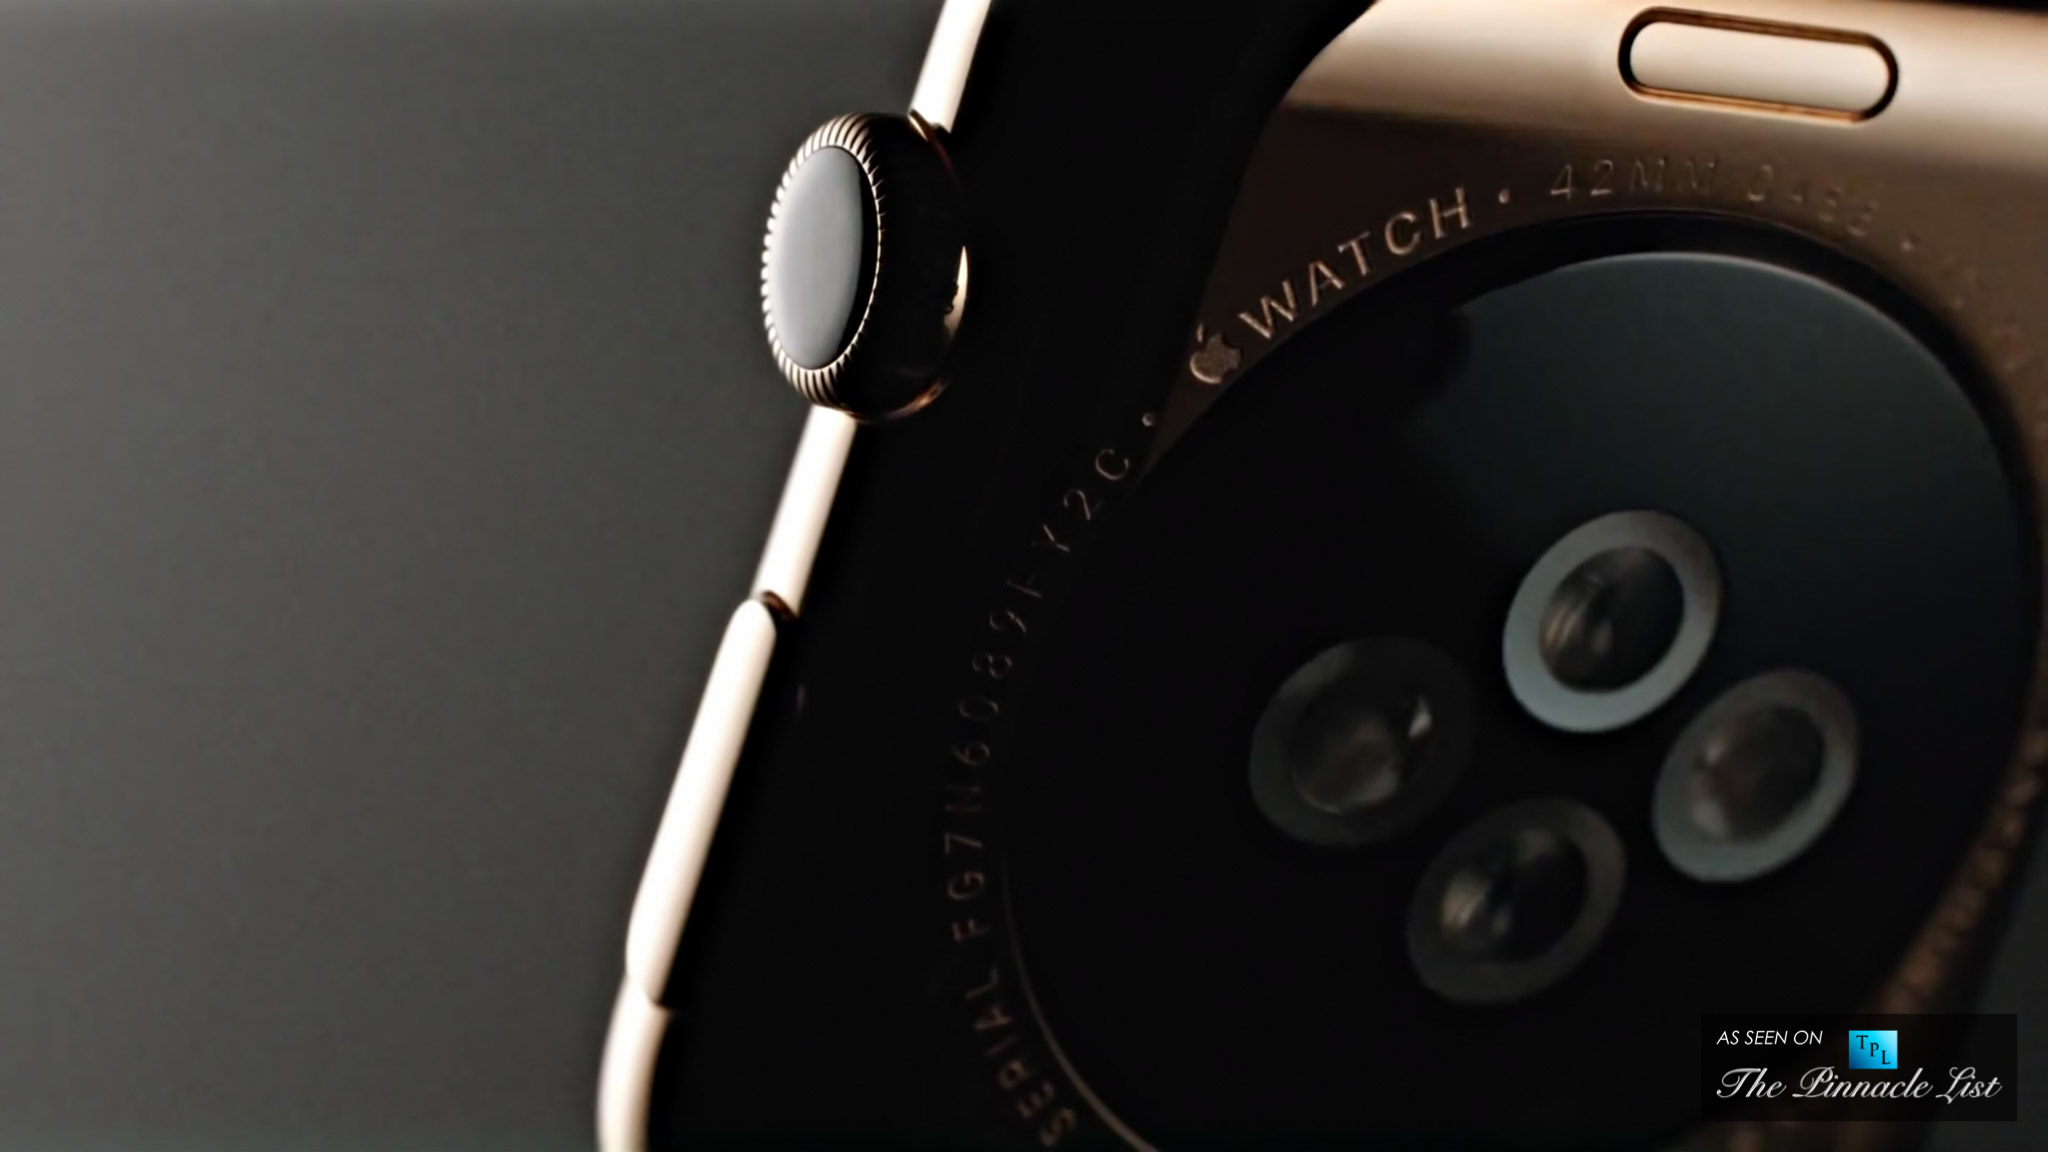 The Gold Apple Watch Edition - Pinnacle Luxury Technology with Elegant Fashion